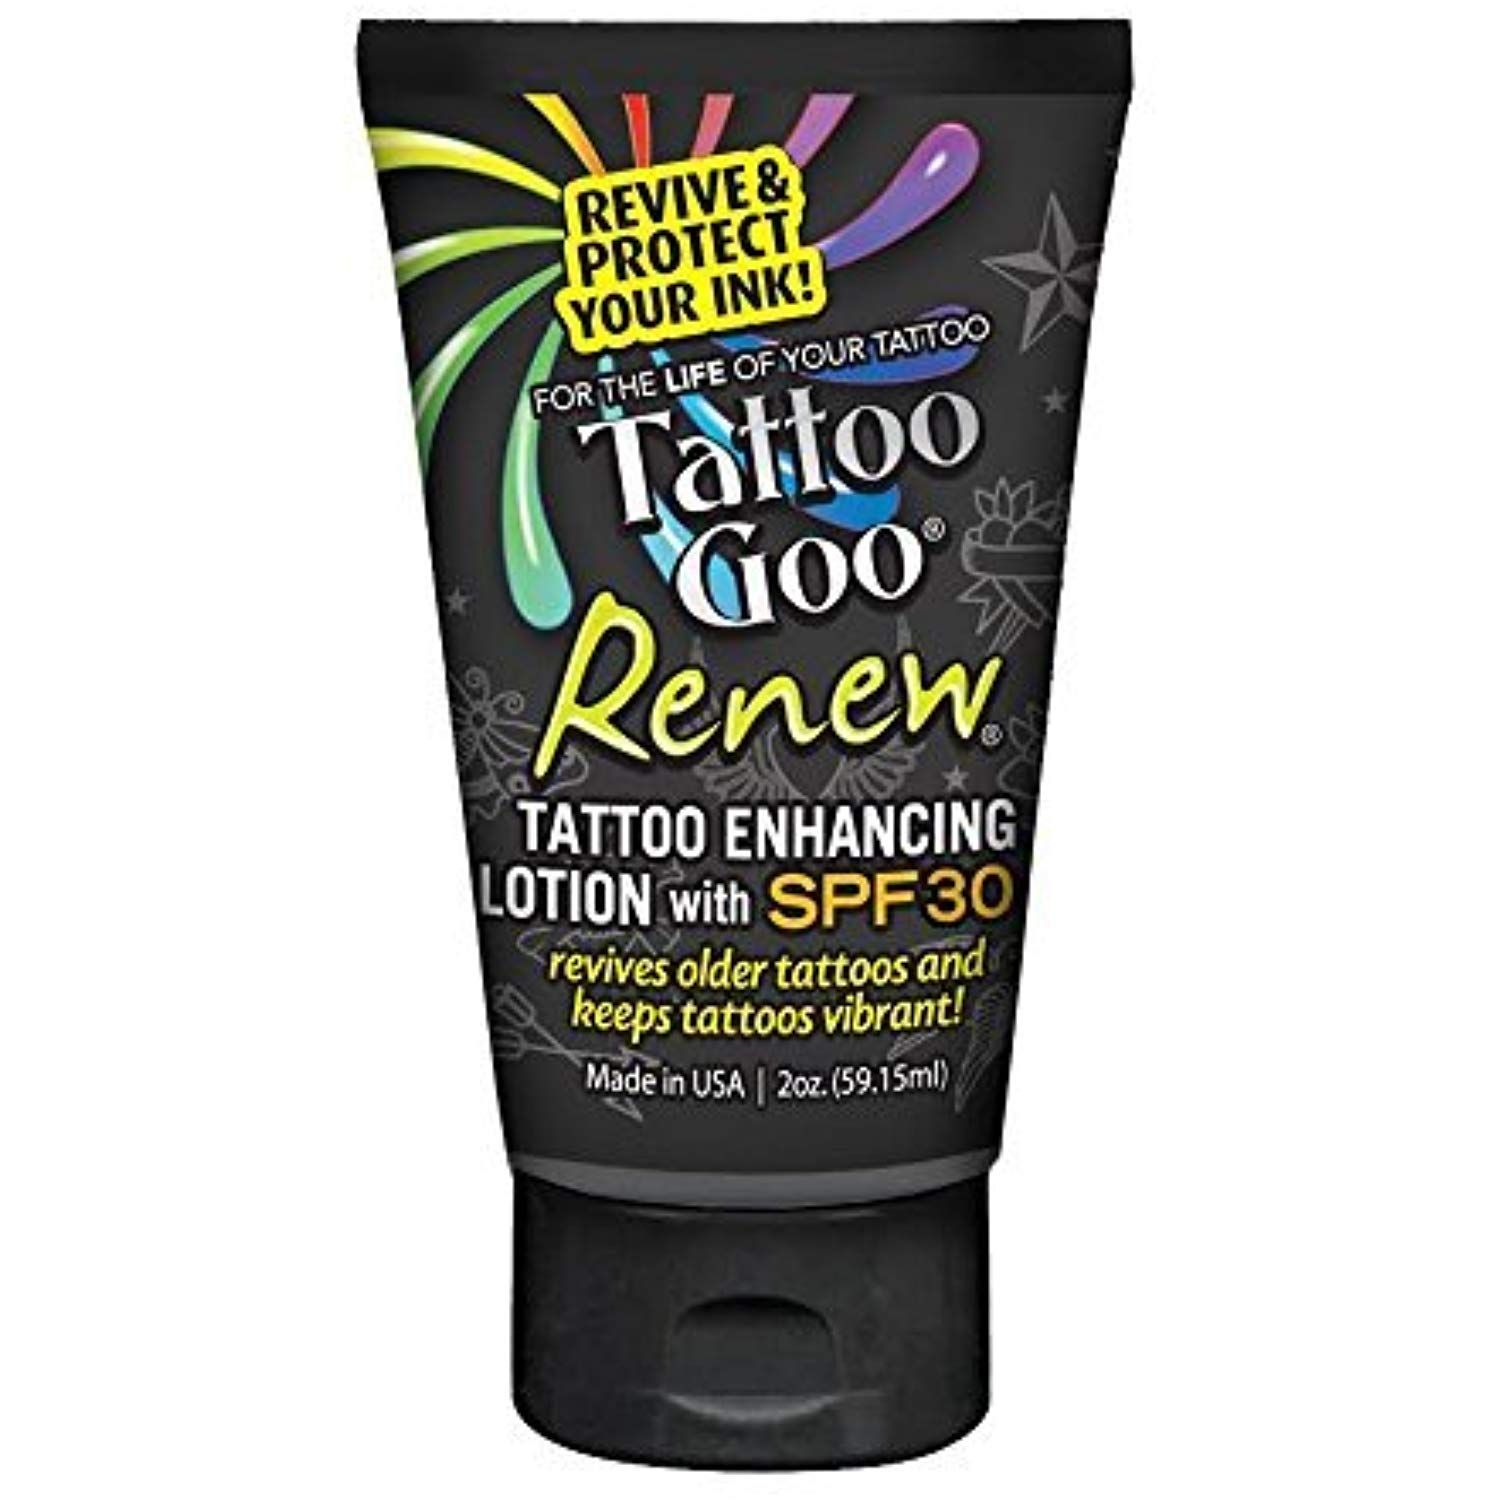 Tattoo Goo Renew Enhancing Lotion SPF 30, 2 Ounce * Be sure to check ...